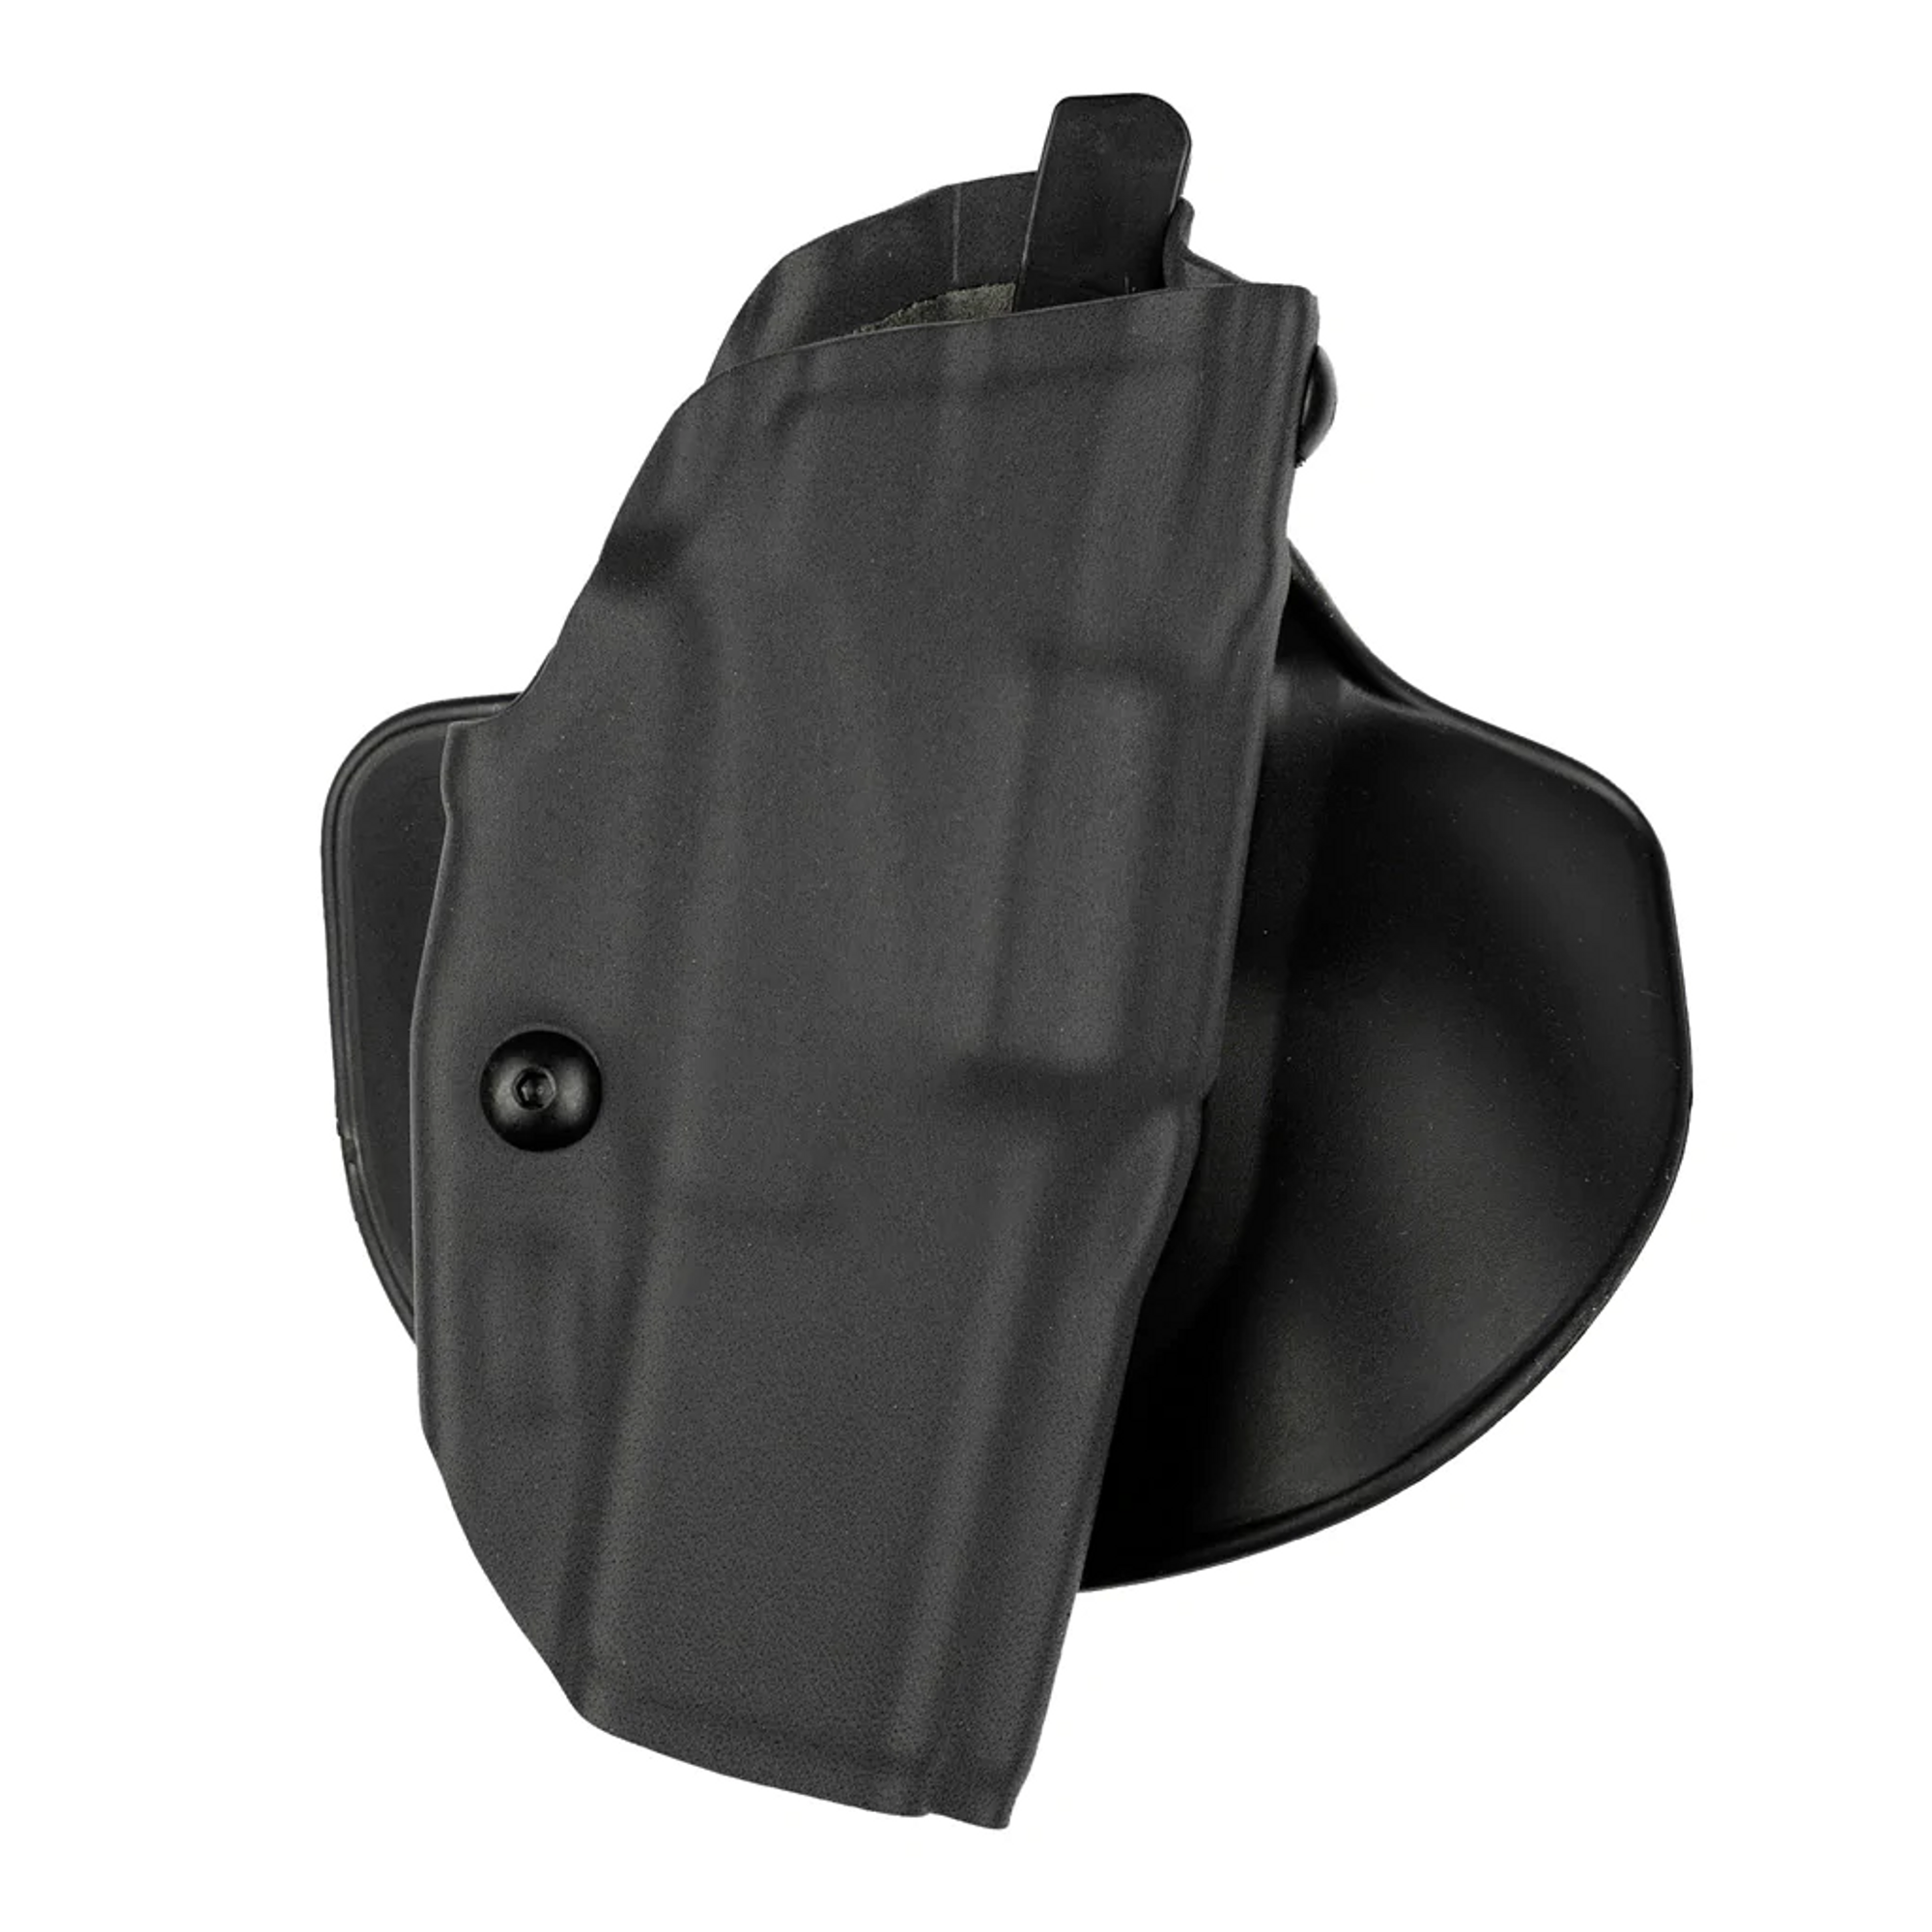 Model 6378 Als Concealment Paddle Holster W/ Belt Loop For Smith & Wesson M&p 9 W/ Light